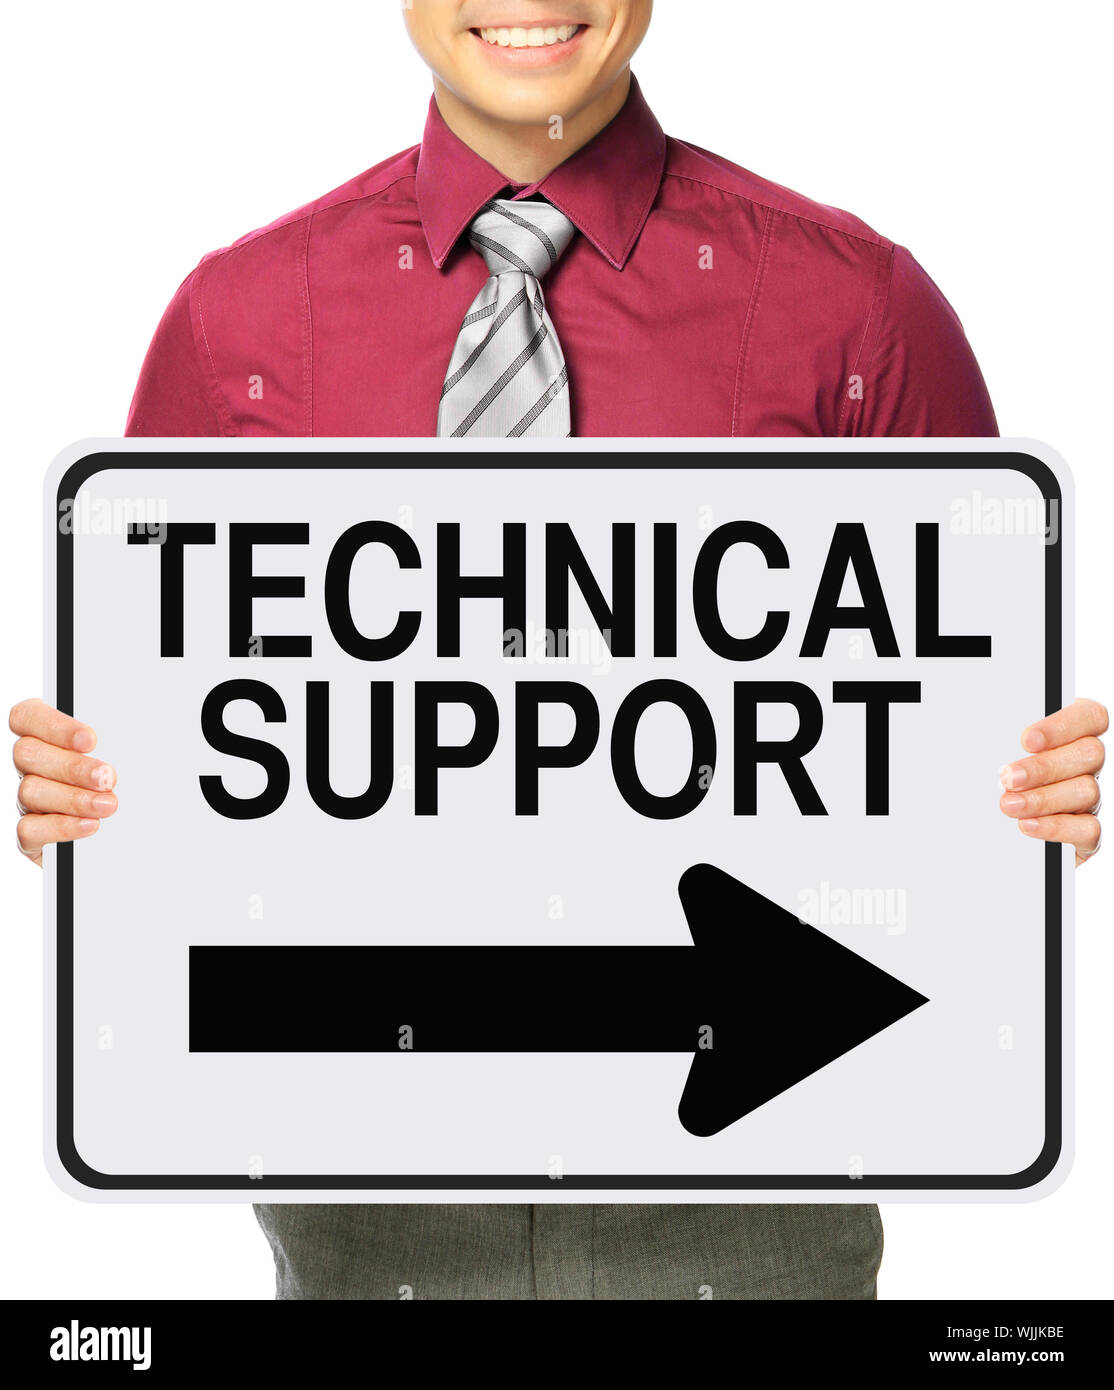 Technical Support This Way Stock Photo